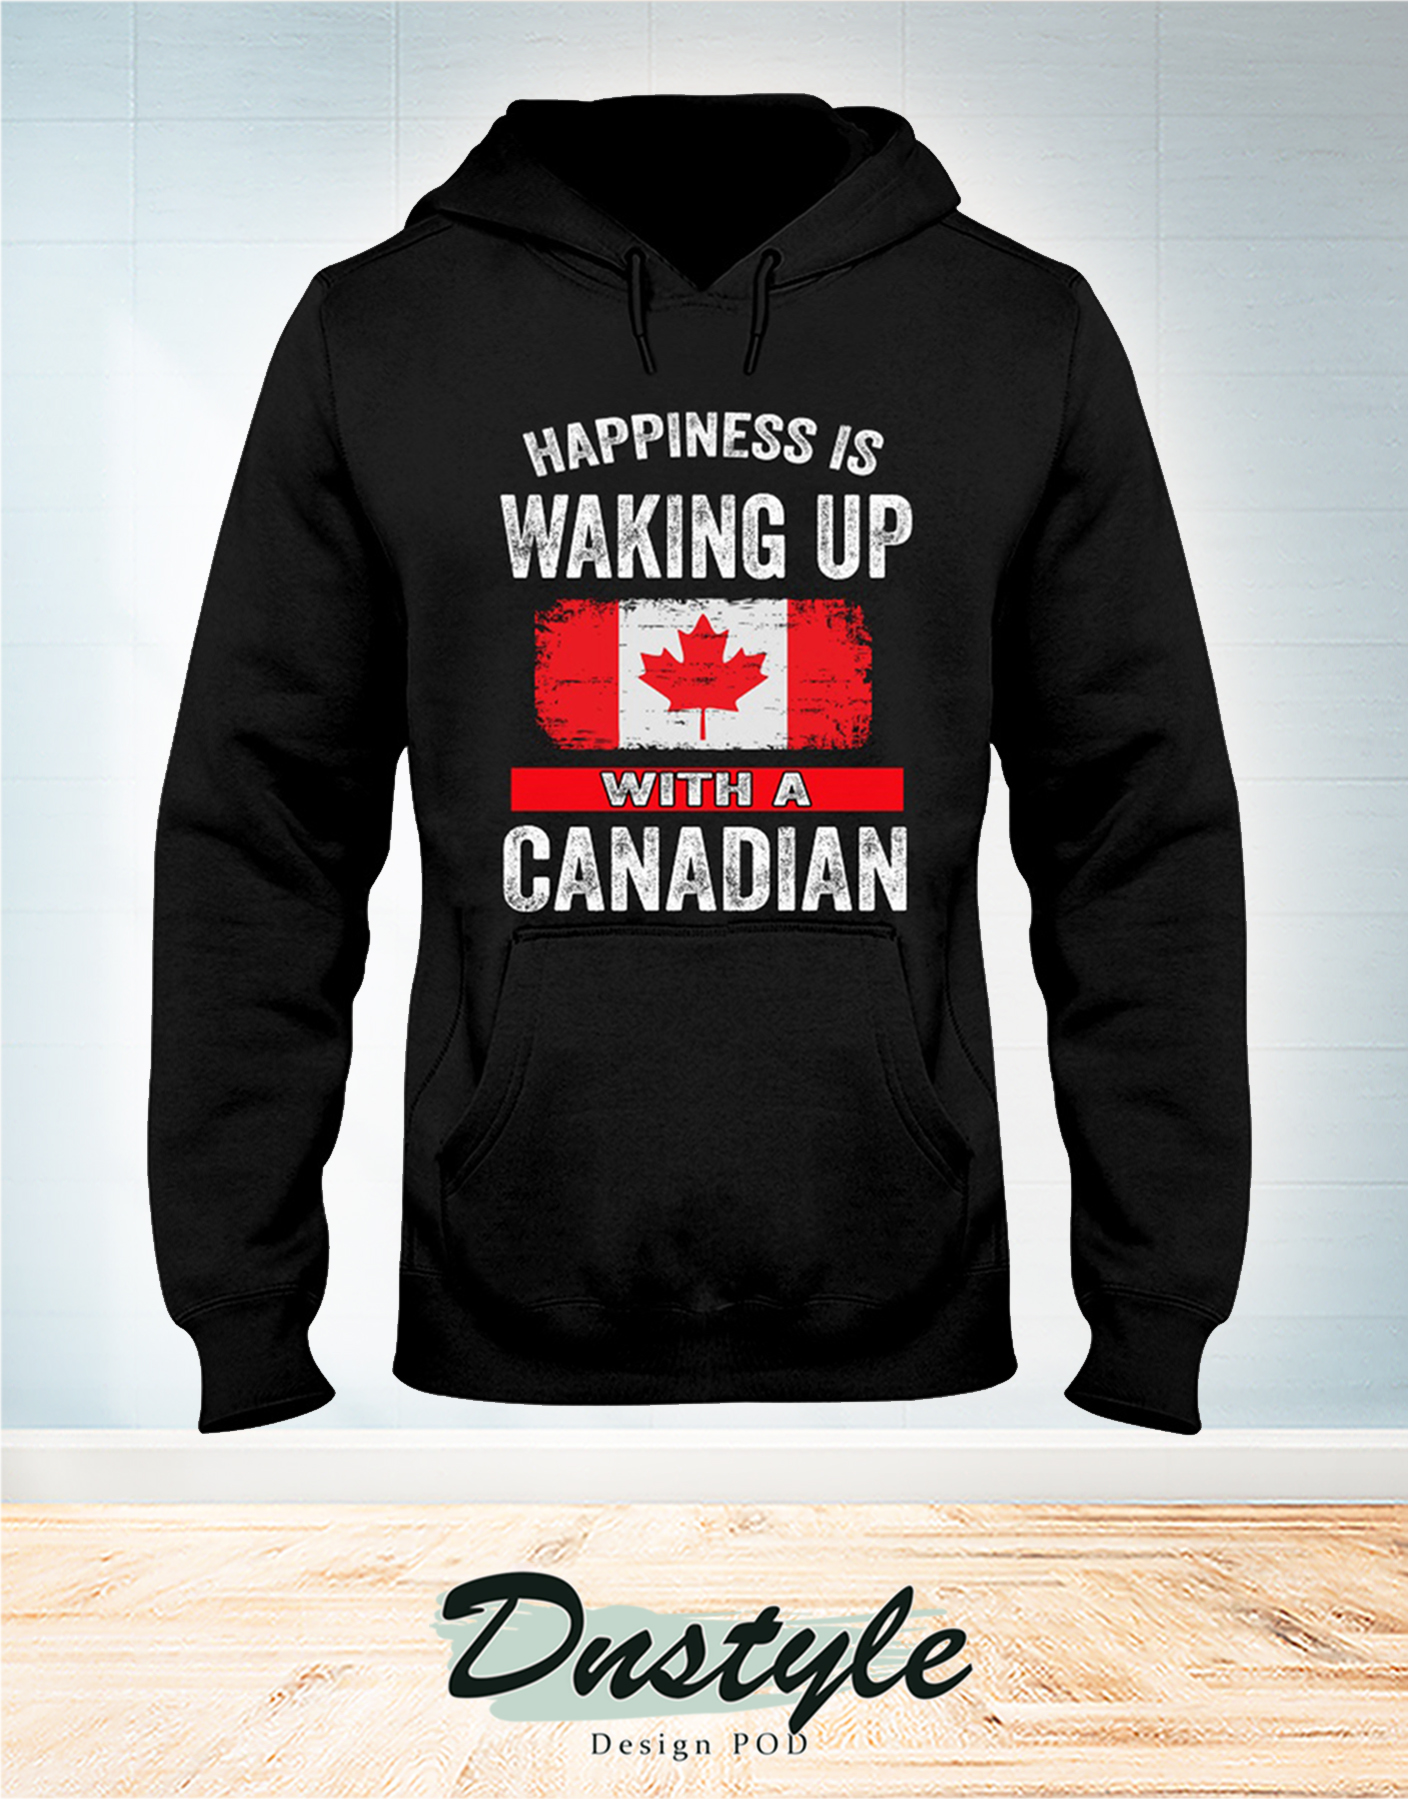 Happiness is waking up with a Canadian t-shirt